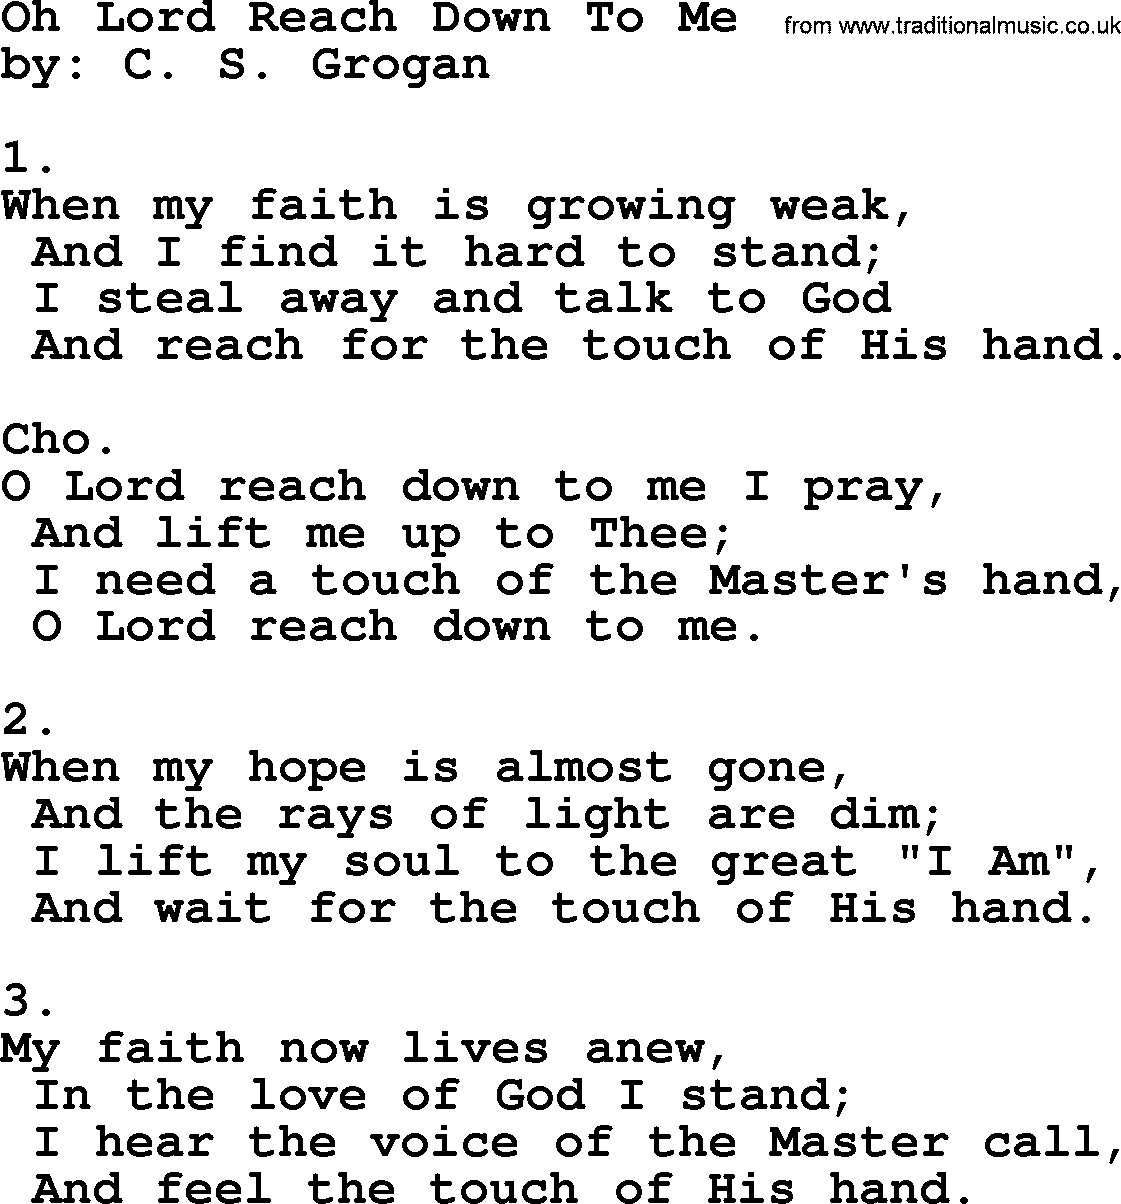 Apostolic & Pentecostal Hymns and Songs, Hymn: Oh Lord Reach Down To Me lyrics and PDF